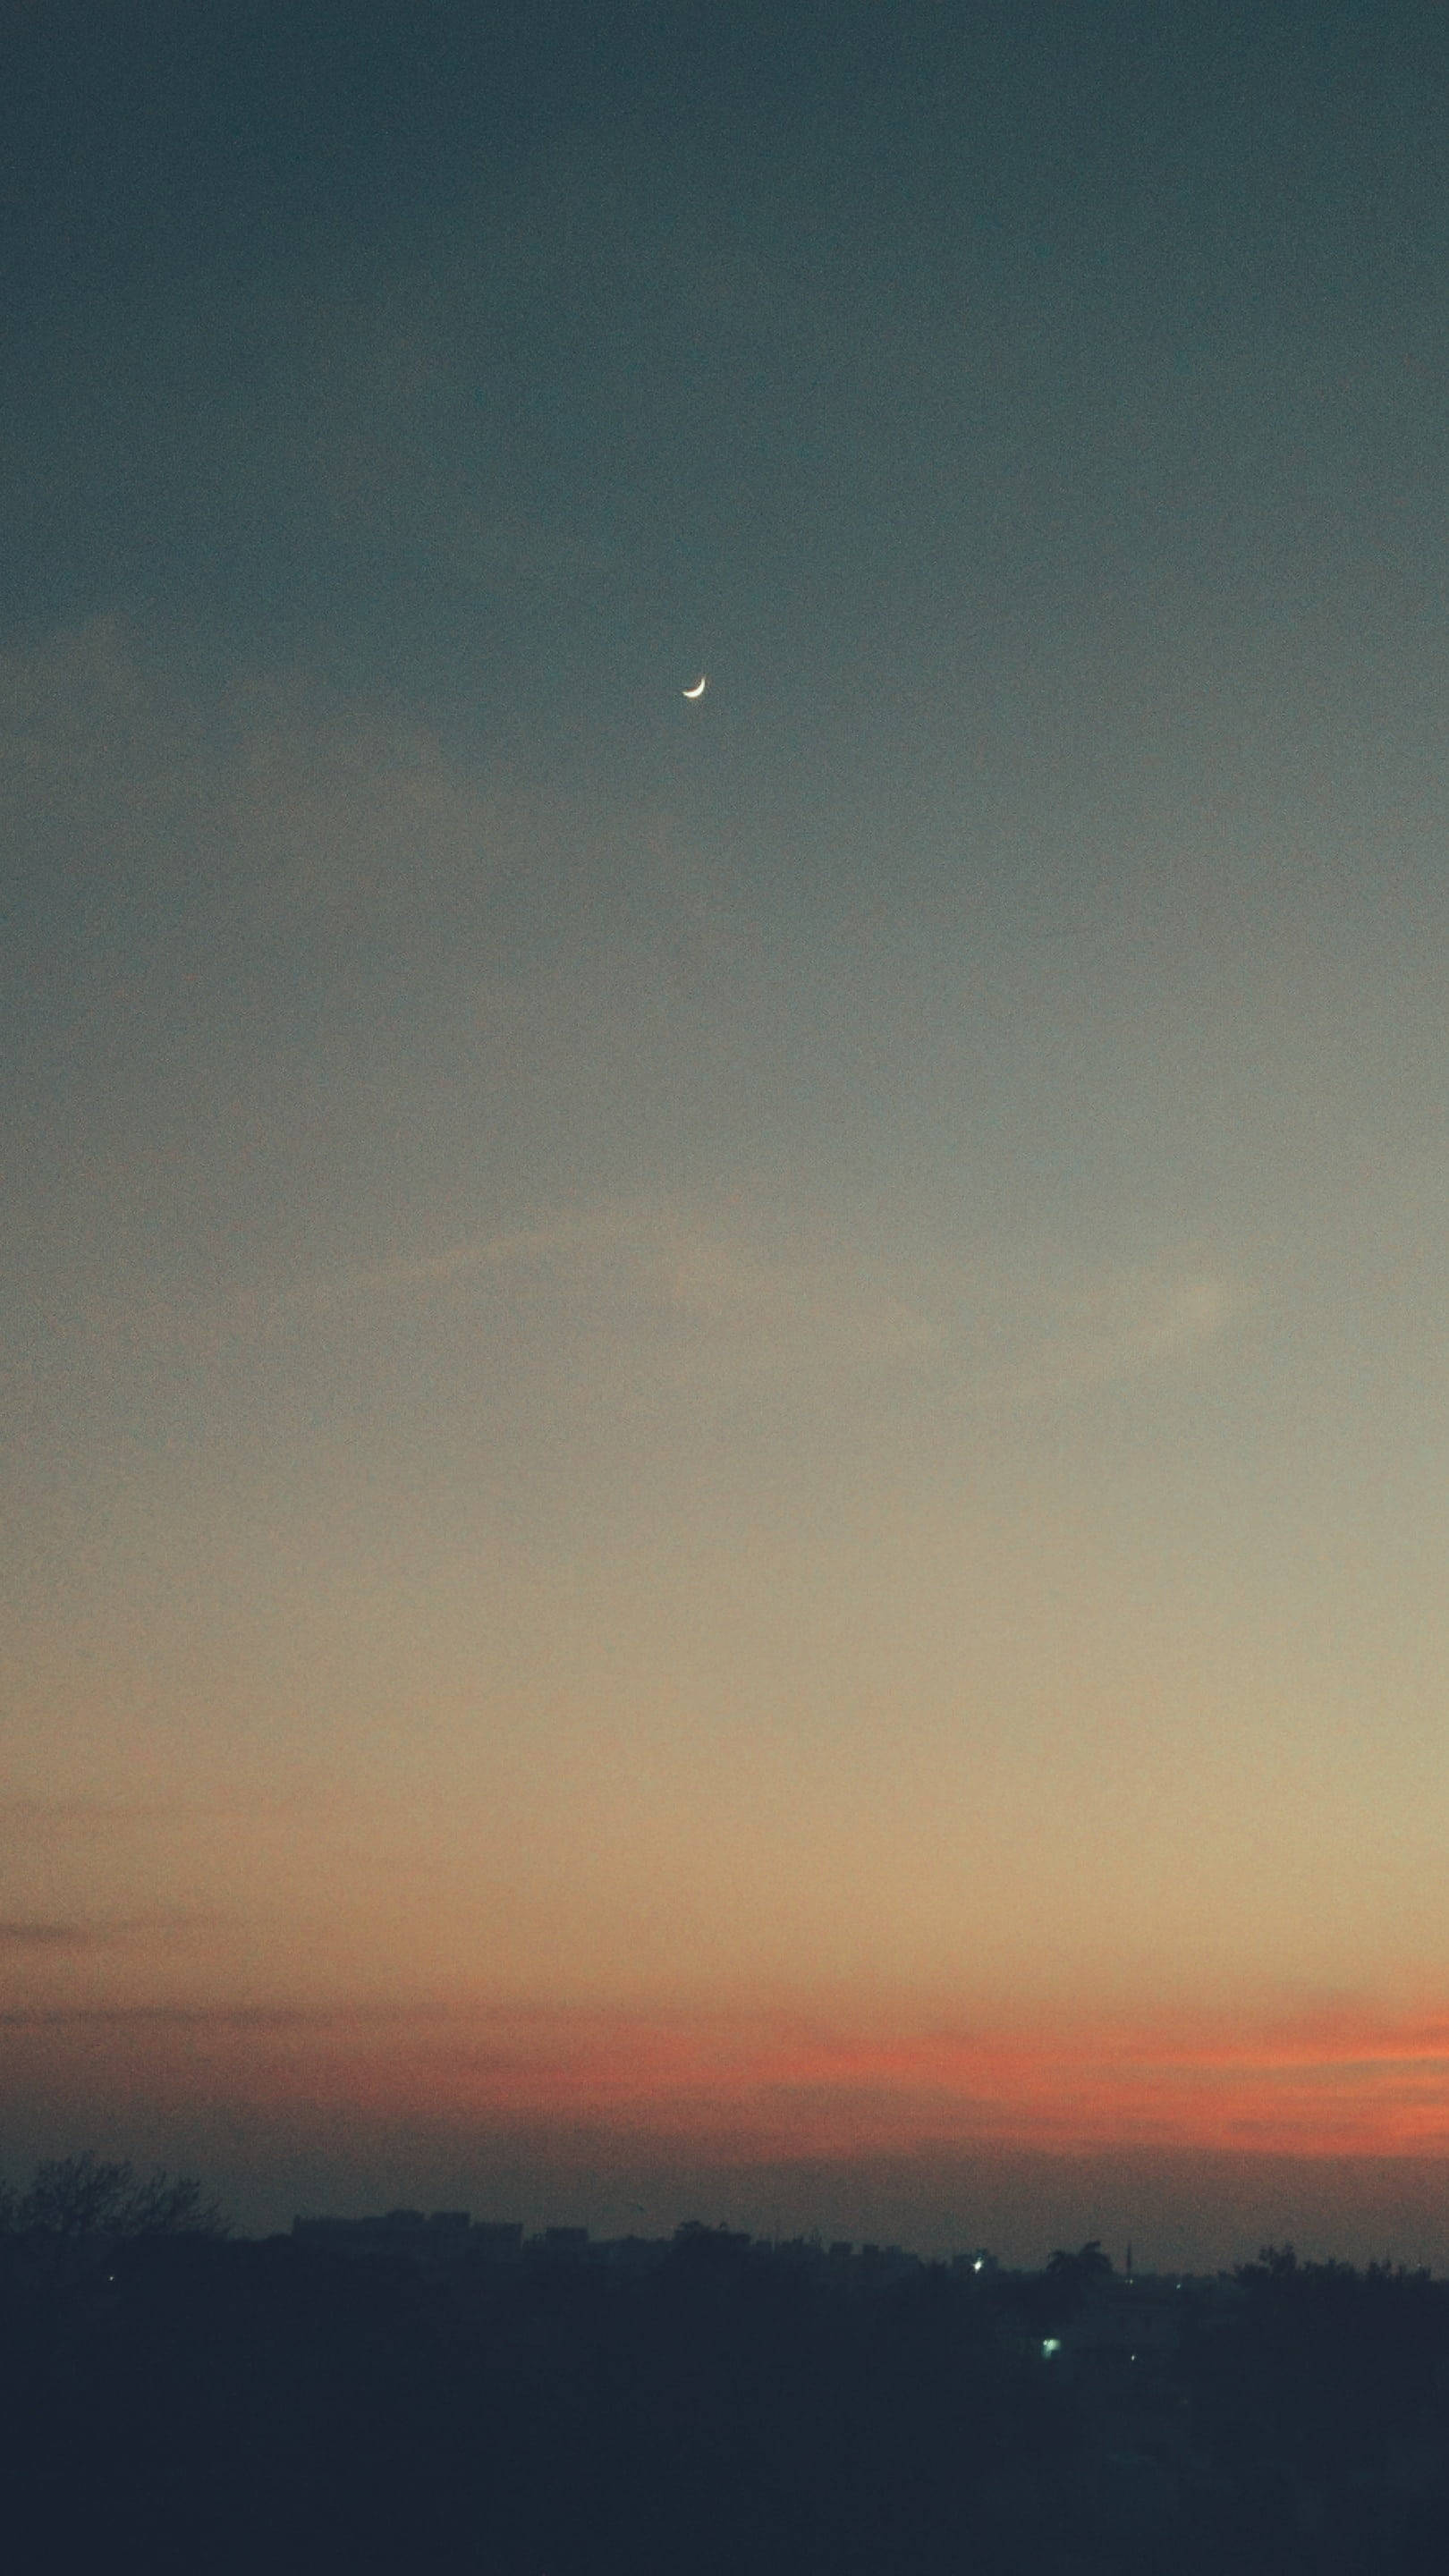 Aesthetic Sunset Sky With Crescent Moon Background